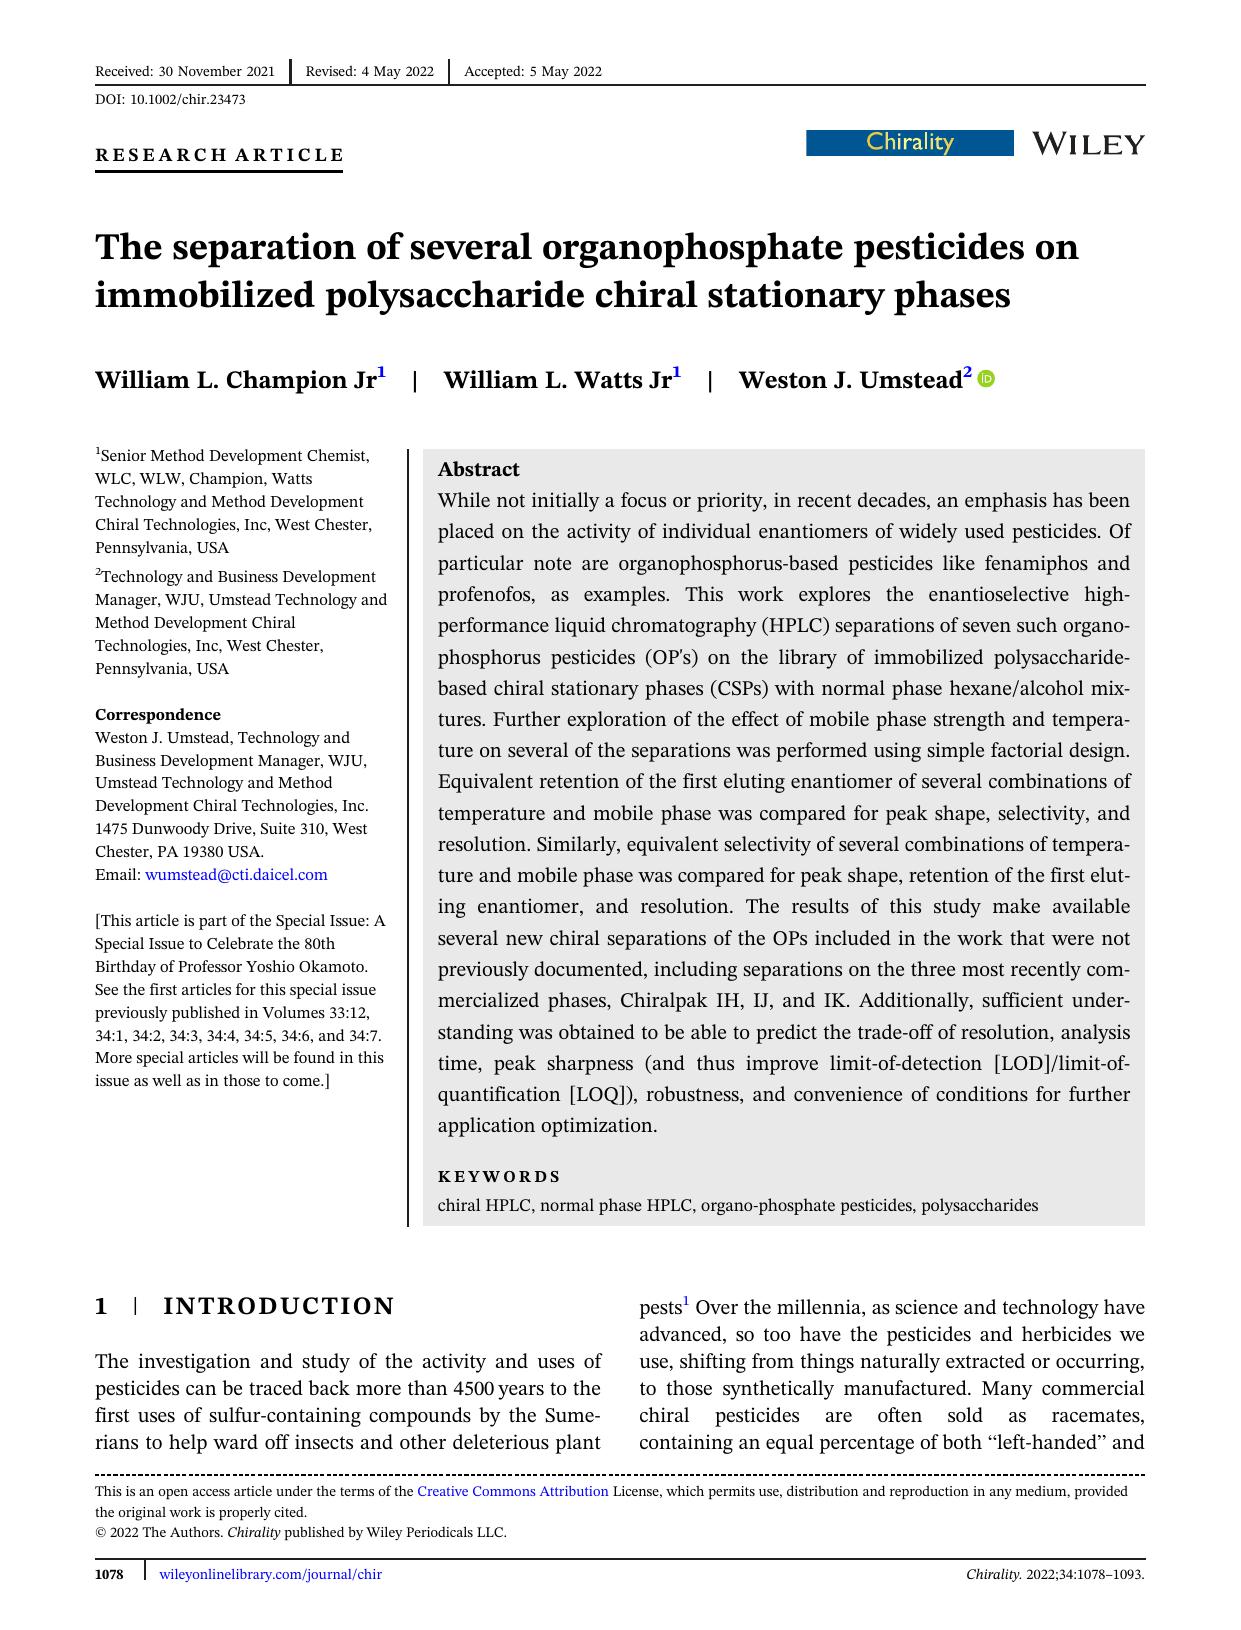 The separation of several organophosphate pesticides on immobilized polysaccharide chiral stationary phases by William L. Champion William L. Watts Weston J. Umstead